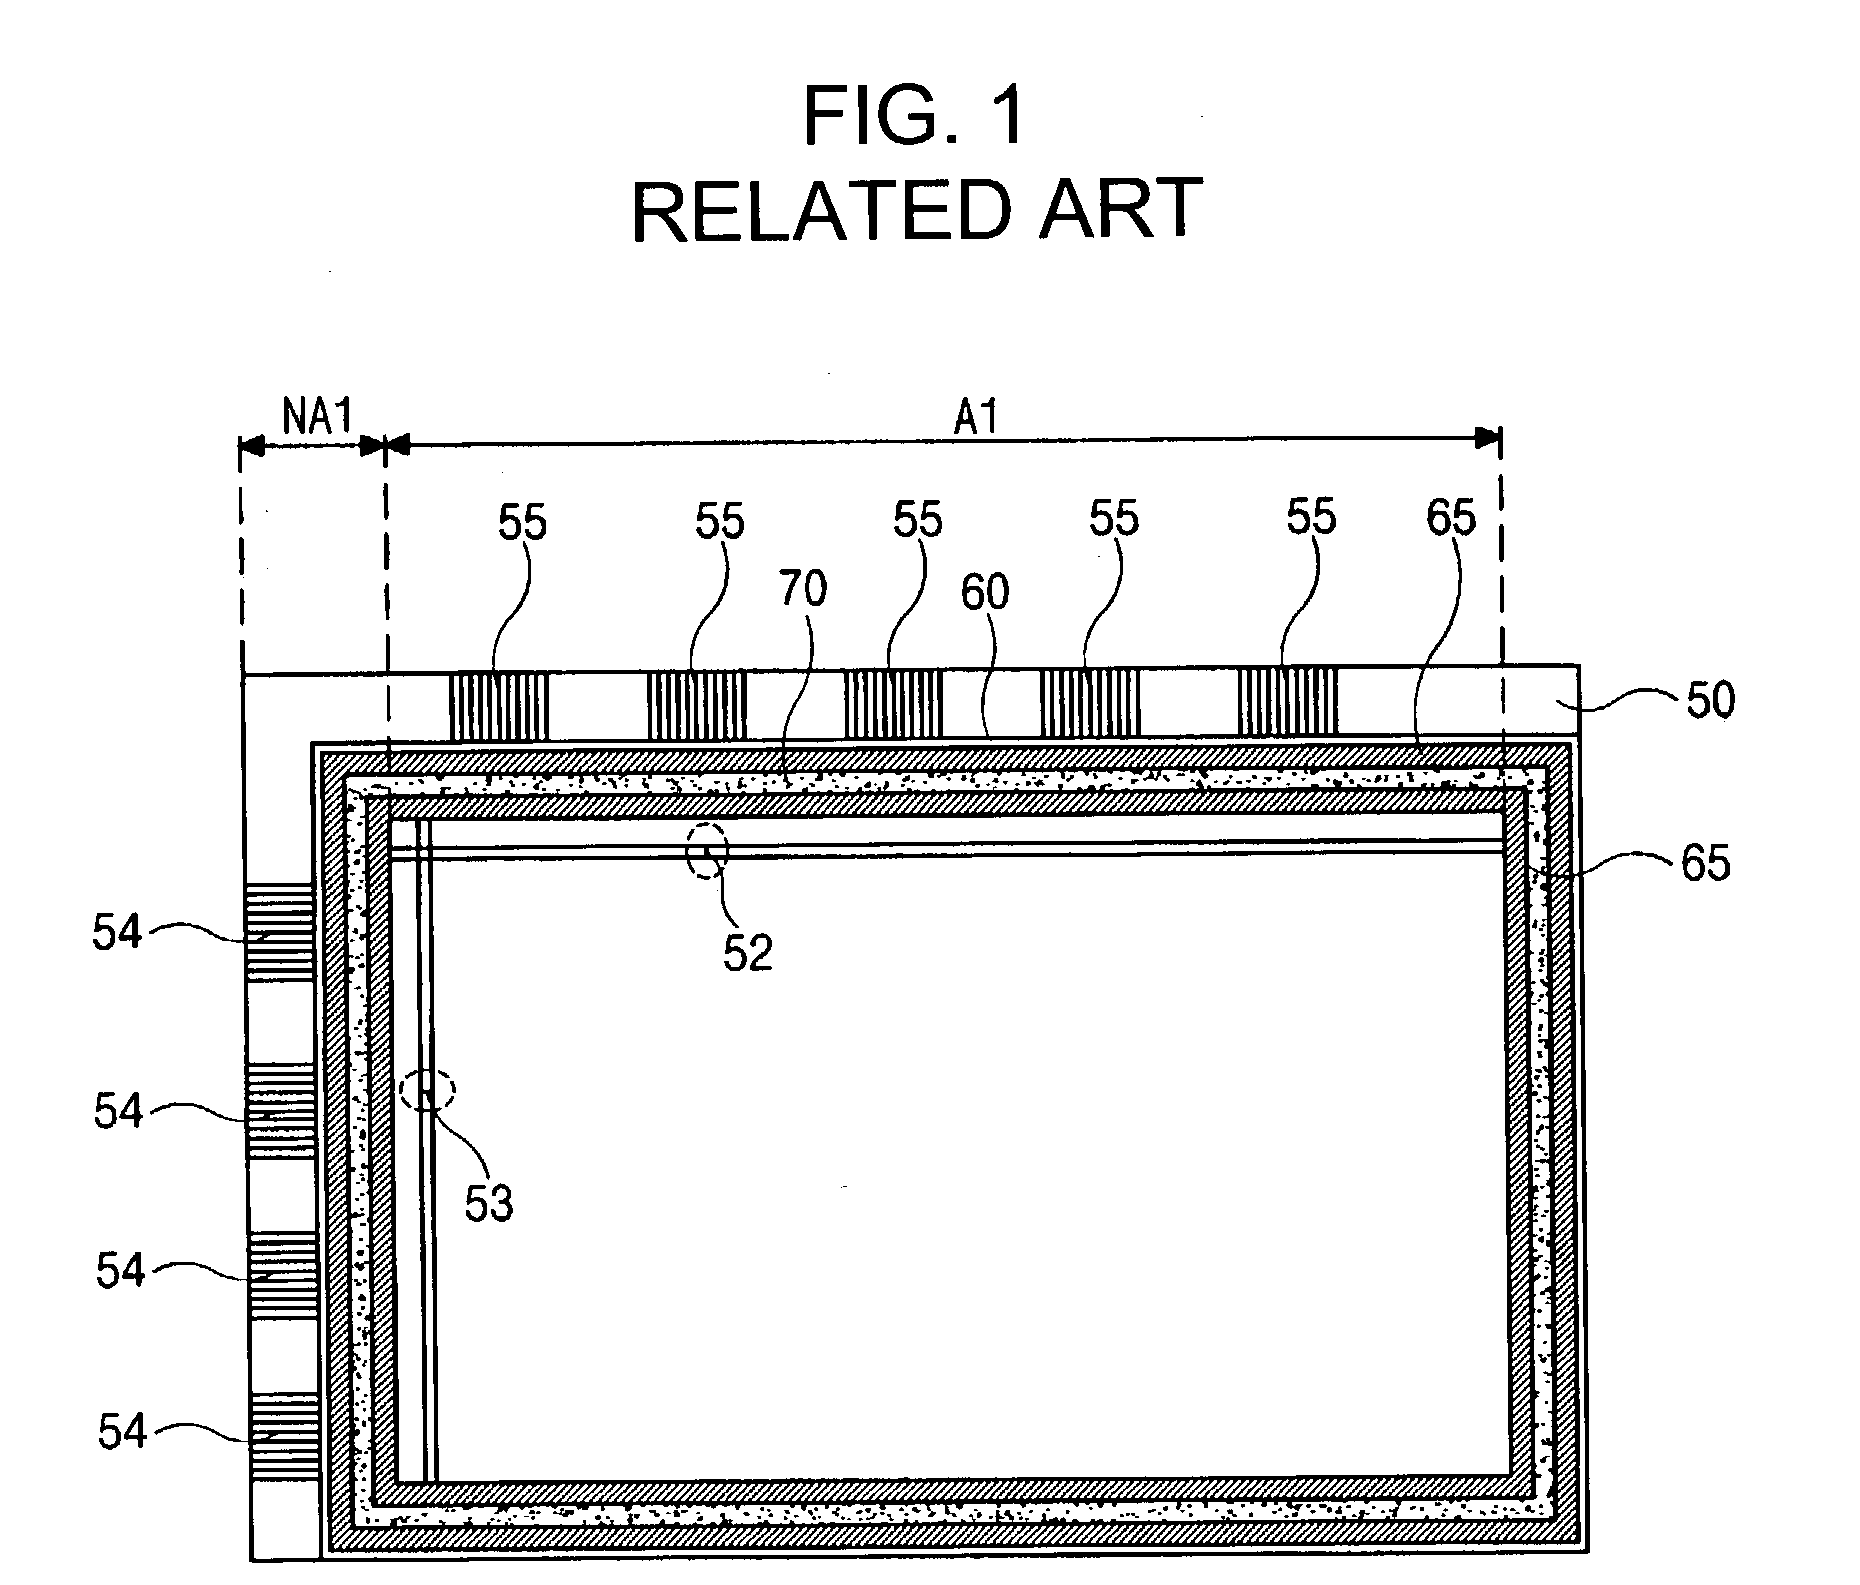 Liquid crystal display device having black seal pattern and external resin pattern, and method of fabricating the same